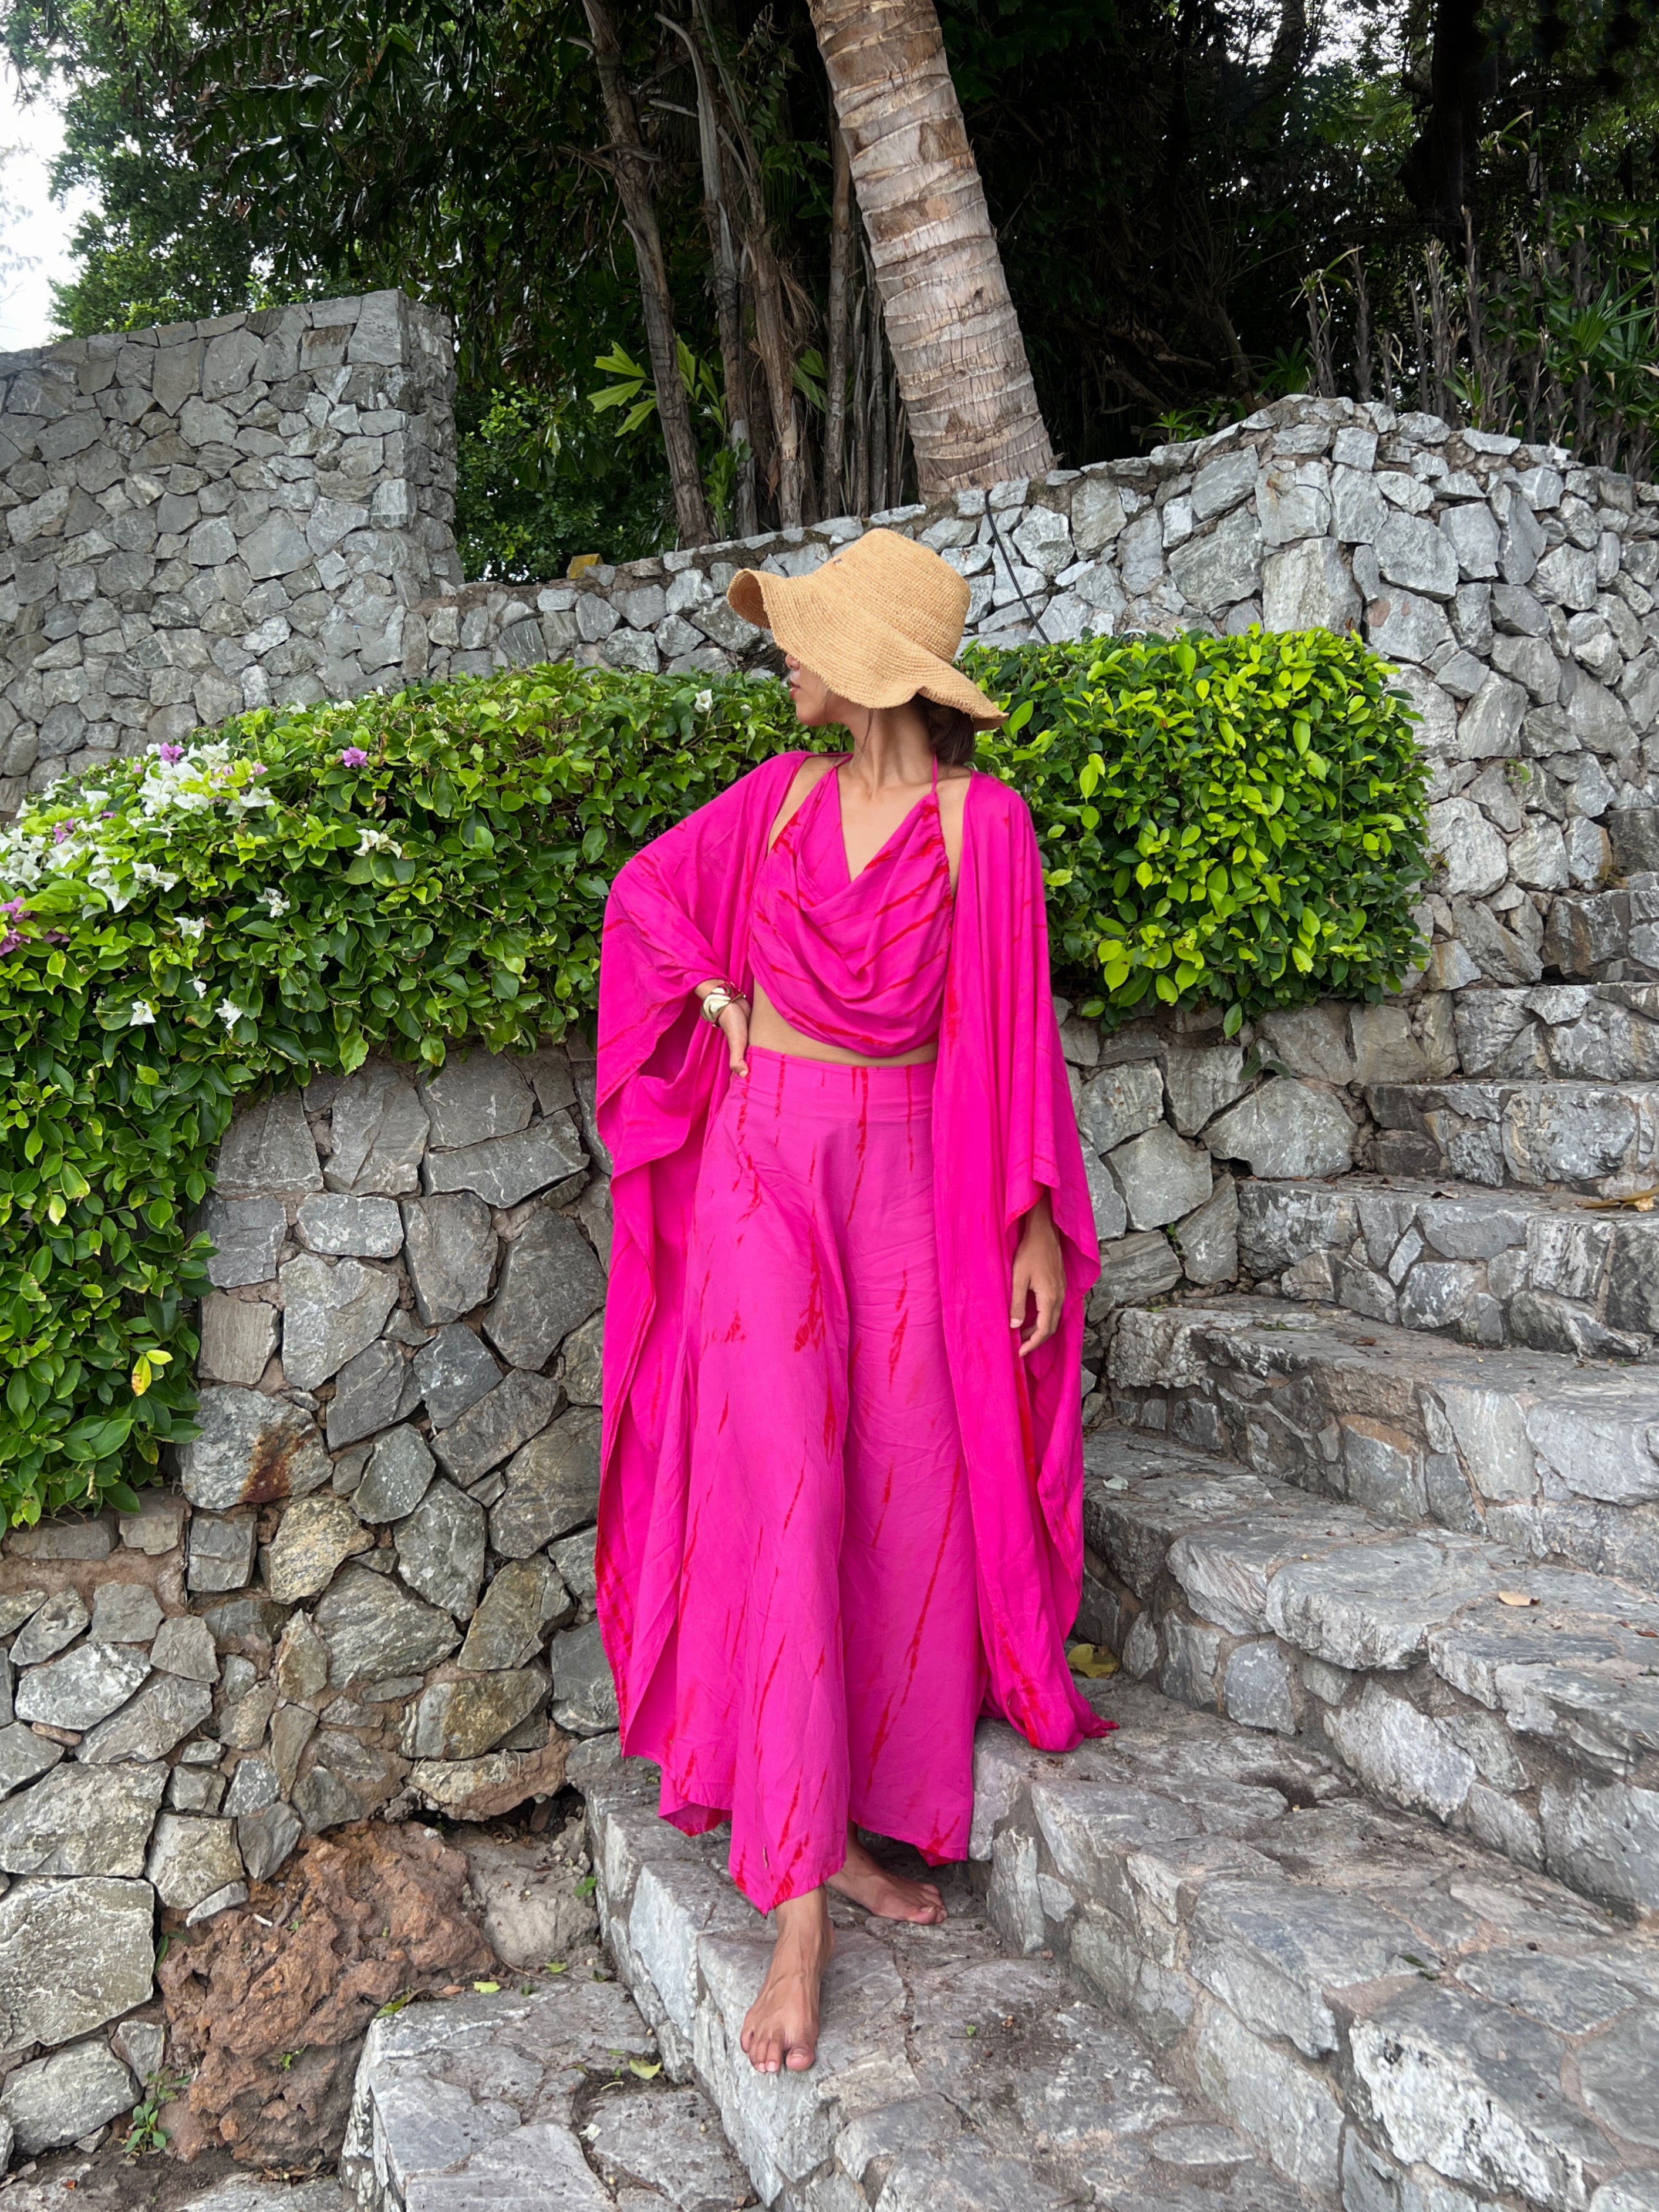 Shop handcrafted Pink tie dye long kimono, the Maya Tie-Dye Kaftan Kimono in Hot Pink. - perfect for beach coverup ,gift for her, resort wear, bridesmaid gifts - available Coco de Chom